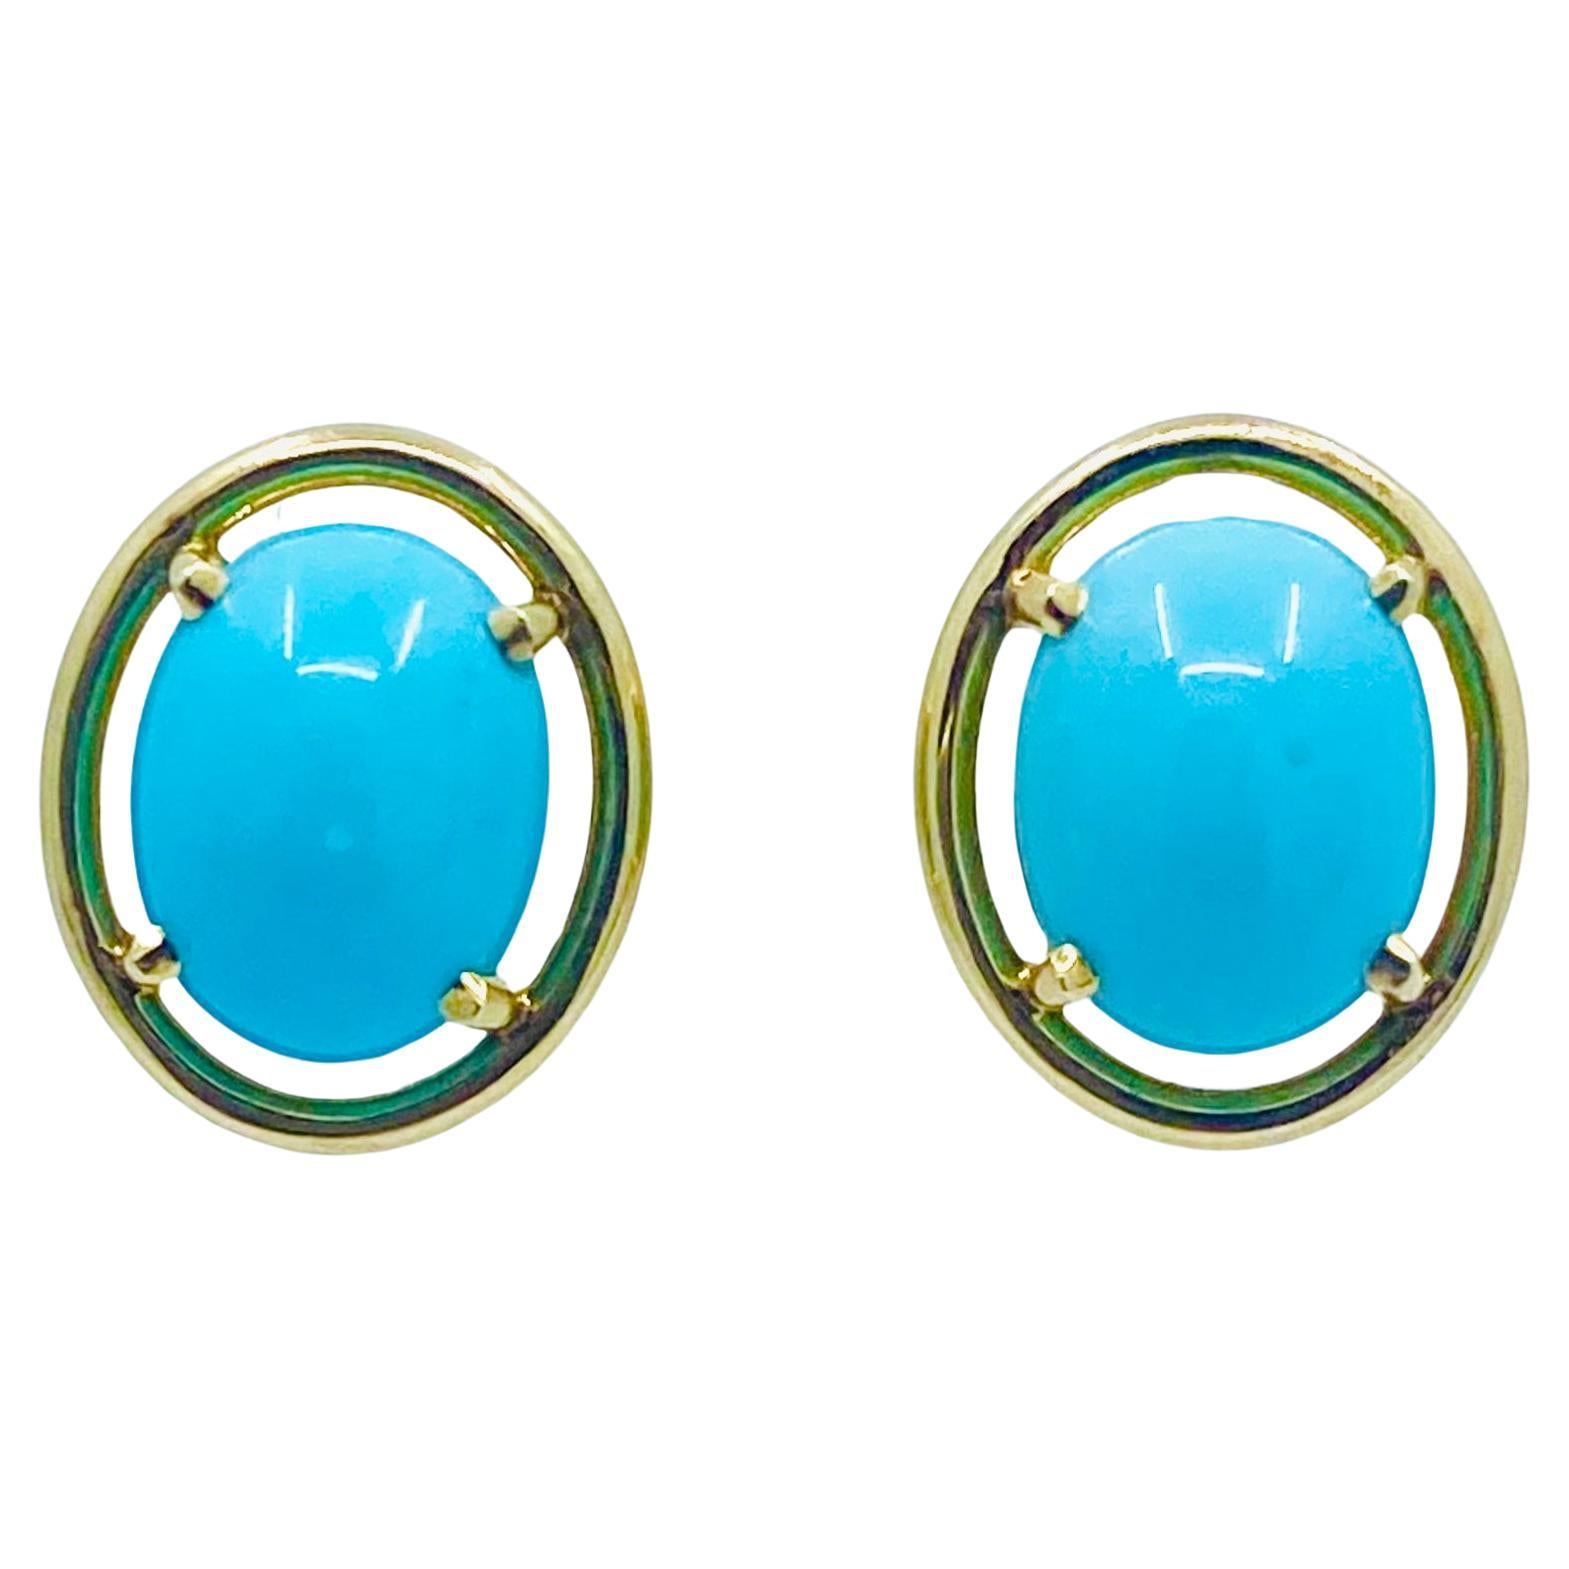 Tiffany & Co. Boucles d'oreilles Turquoise 14k Or